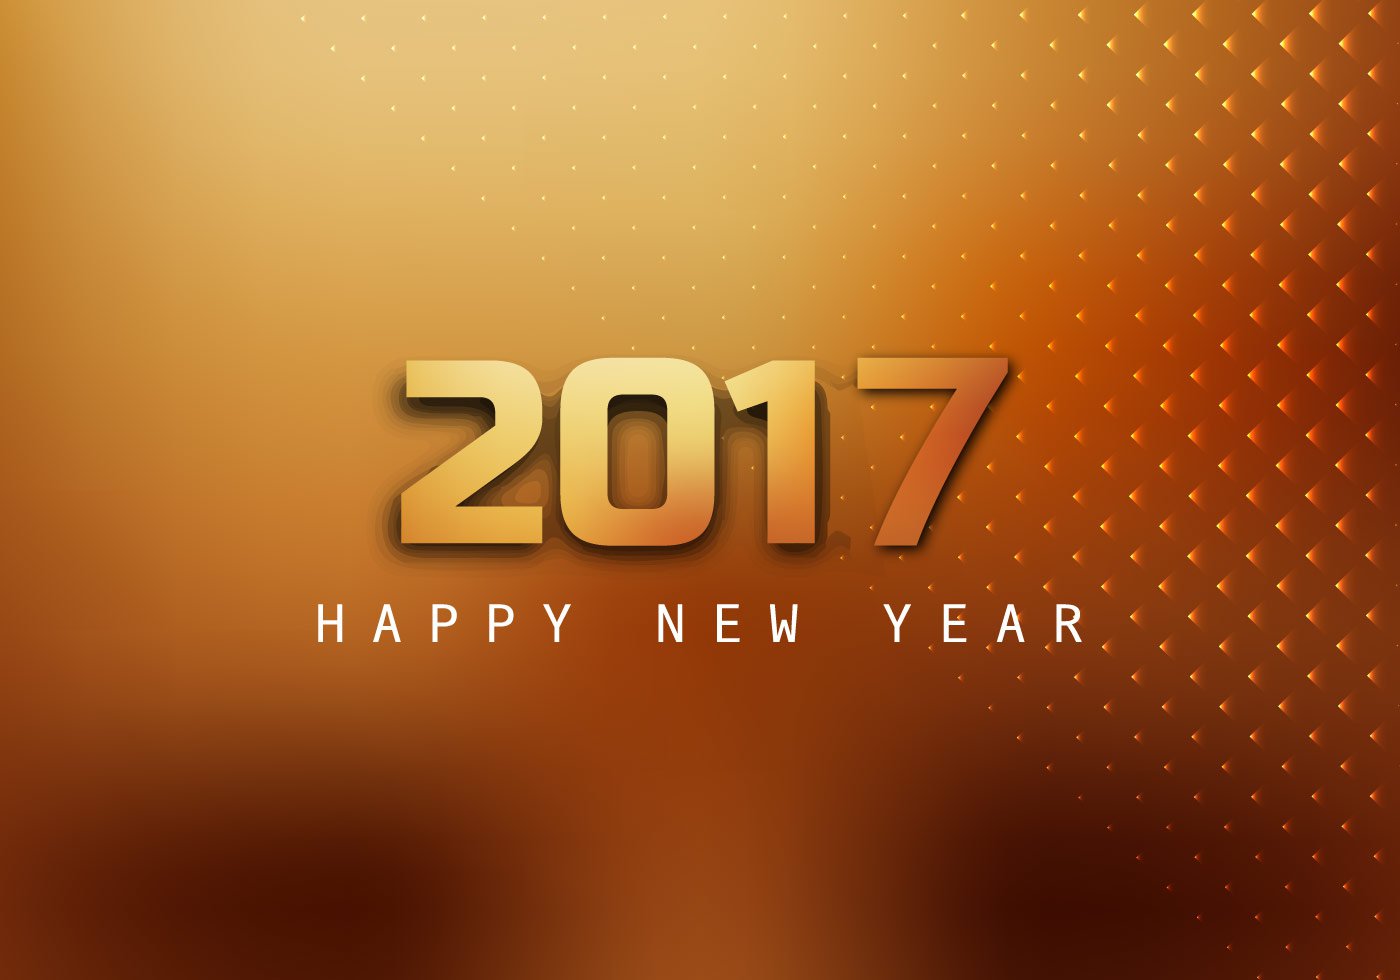 2017 Happy New Year Wishes Wallpaper